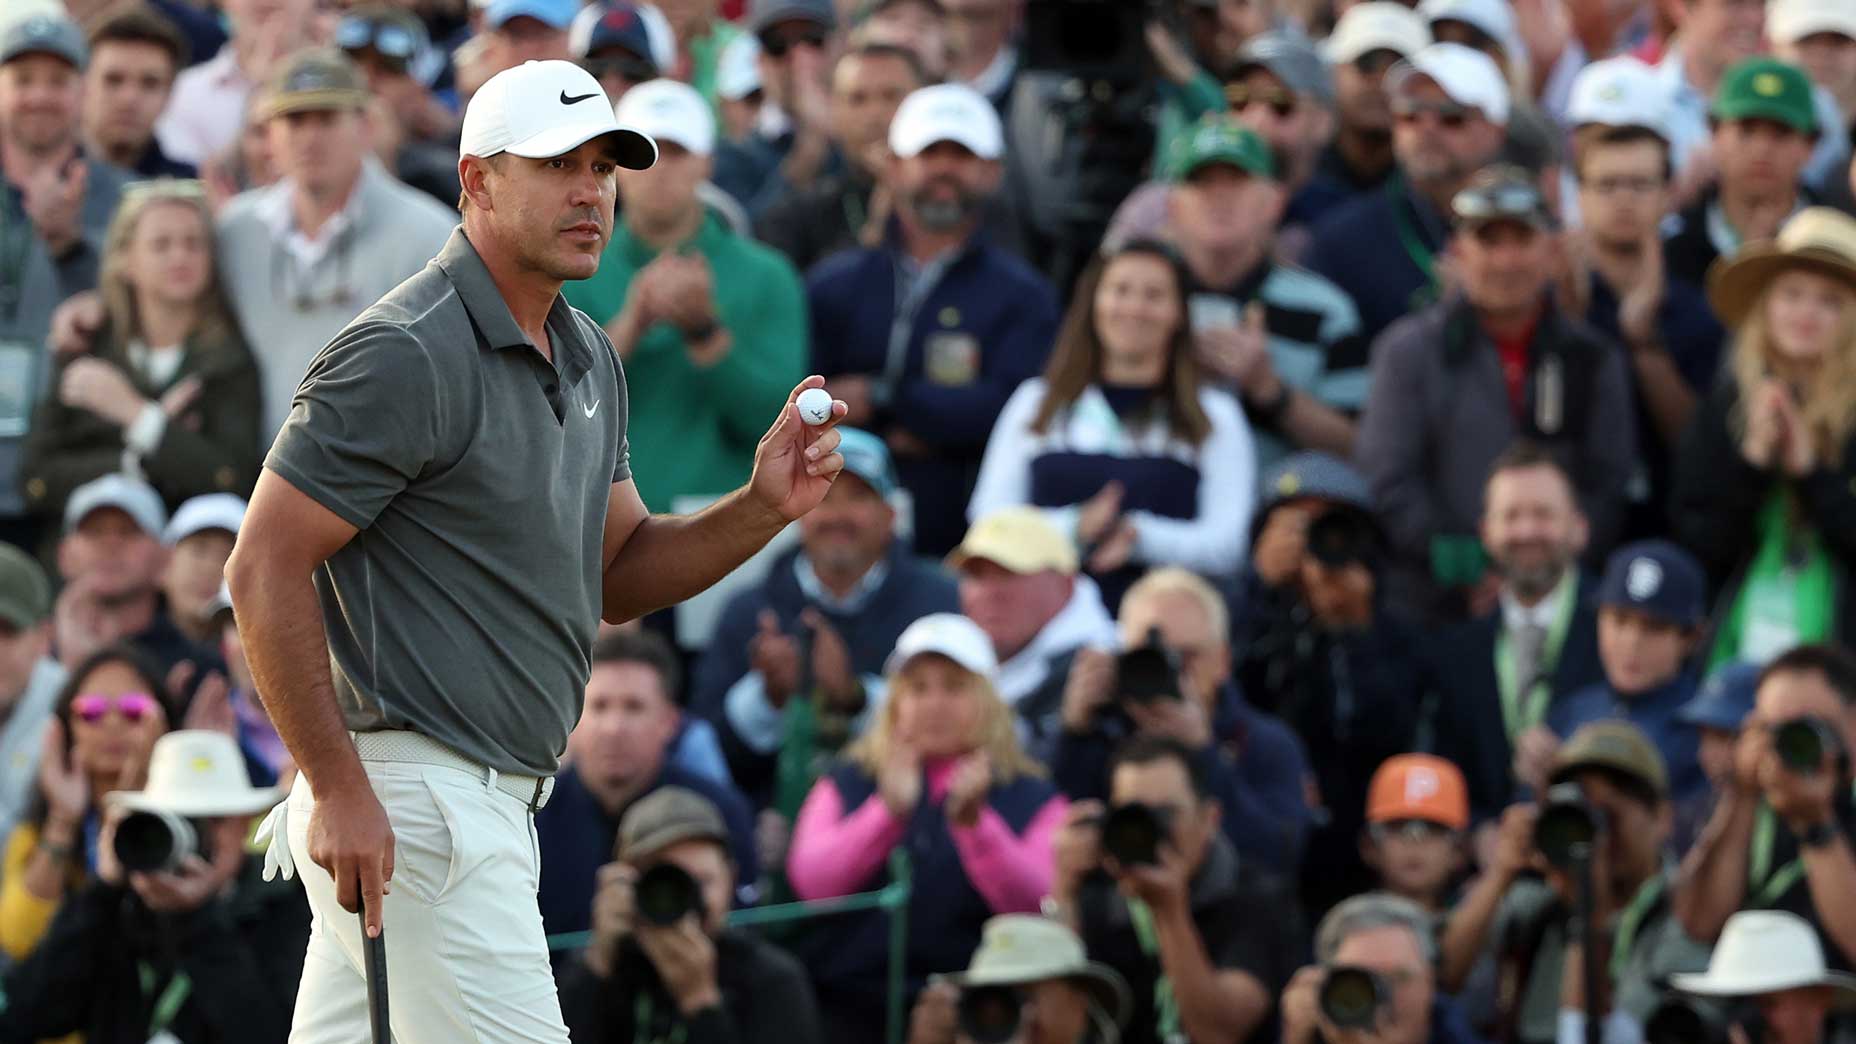 After a stunning defeat, Brooks Koepka made a 9yearold boy’s Masters